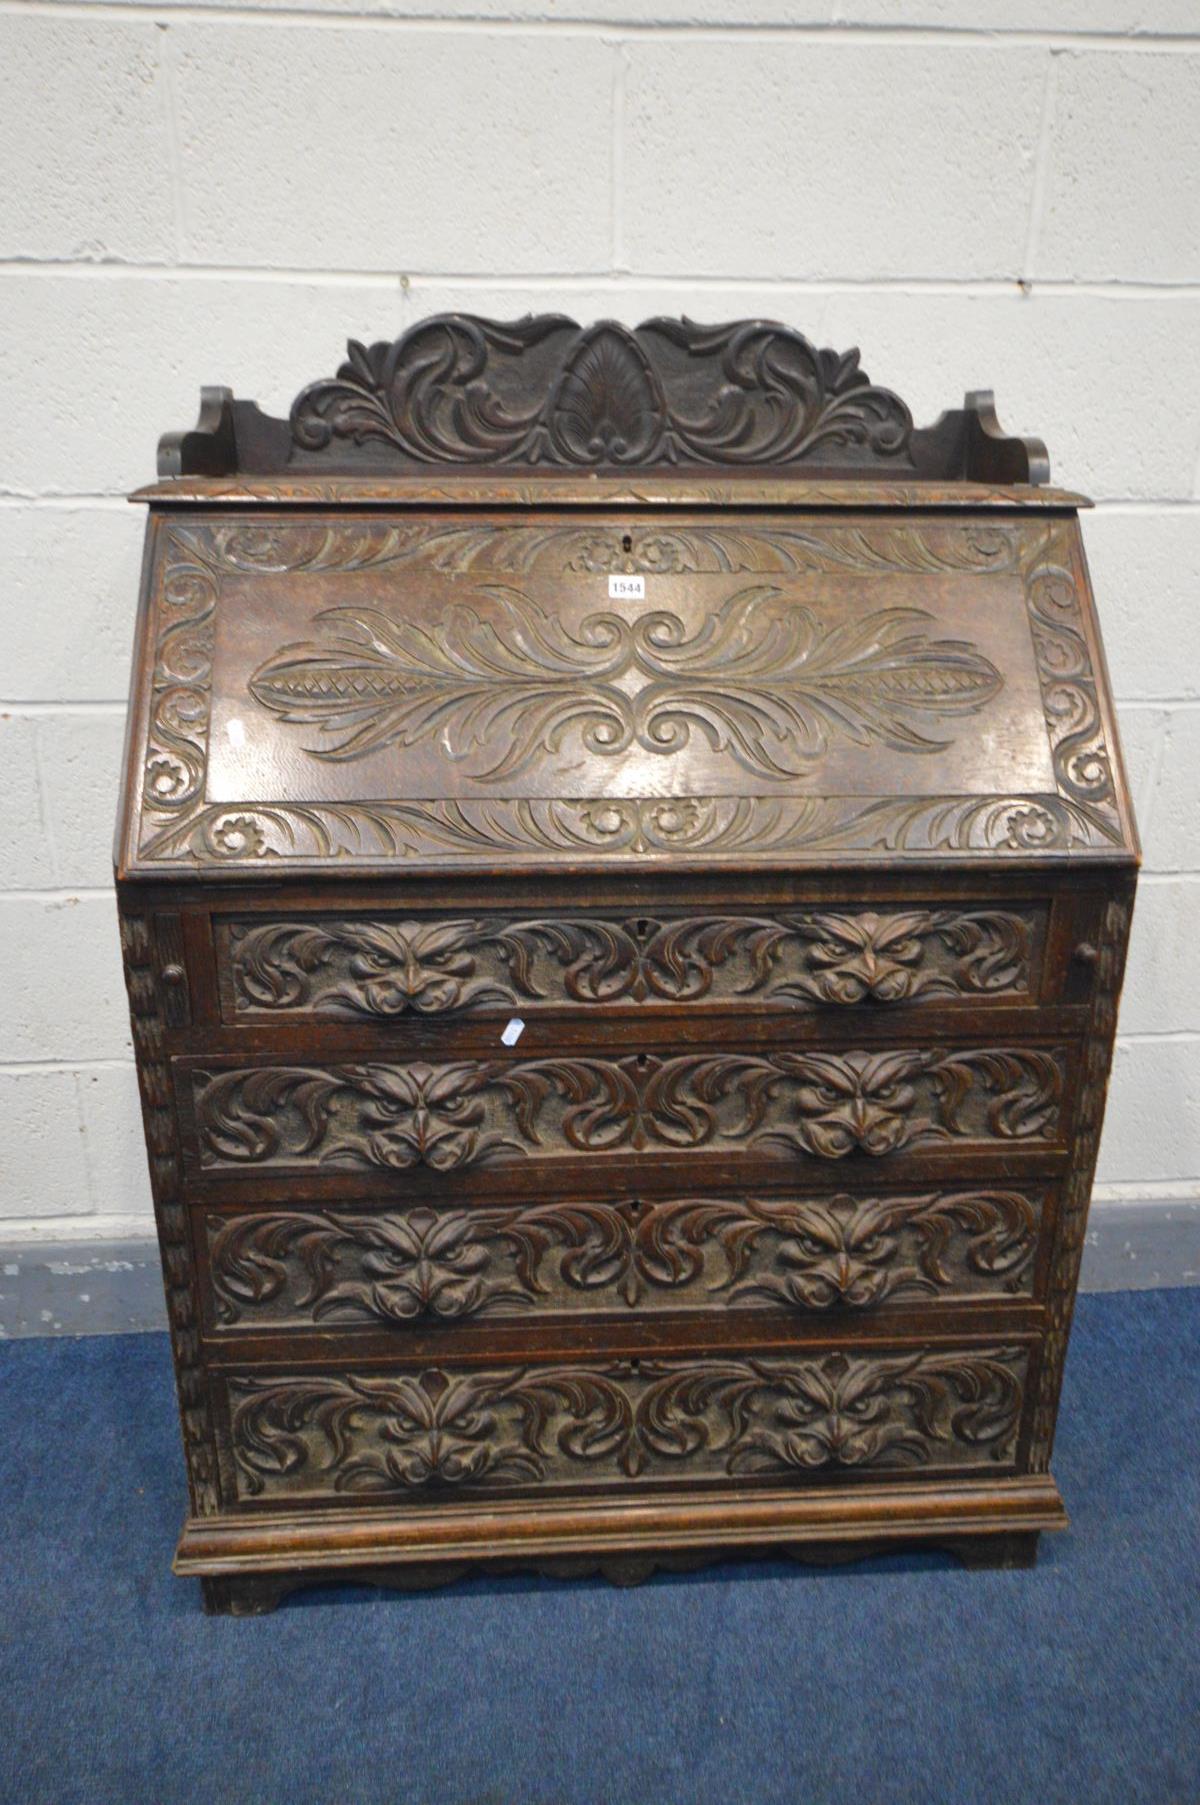 AN EARLY 20TH CENTURY CARVED OAK BUREAU, gallery top, the fall front with a fitted interior, above - Image 2 of 4